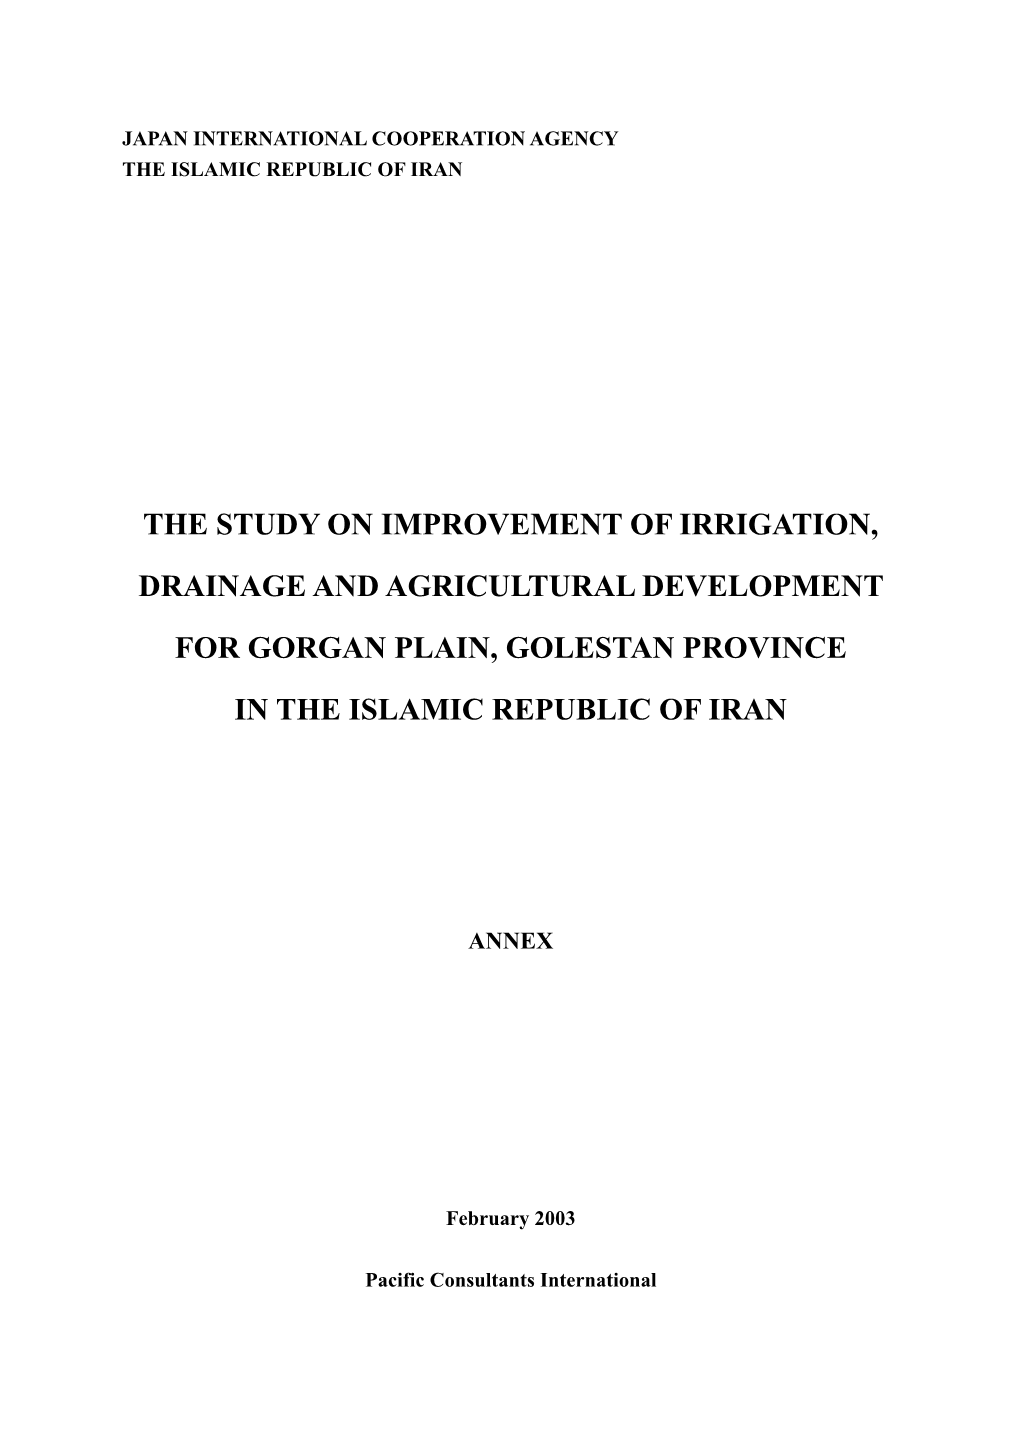 The Study on Improvement of Irrigation, Drainage and Agricultural Development for Gorgan Plain, Golestan Province in the Islamic Republic of Iran